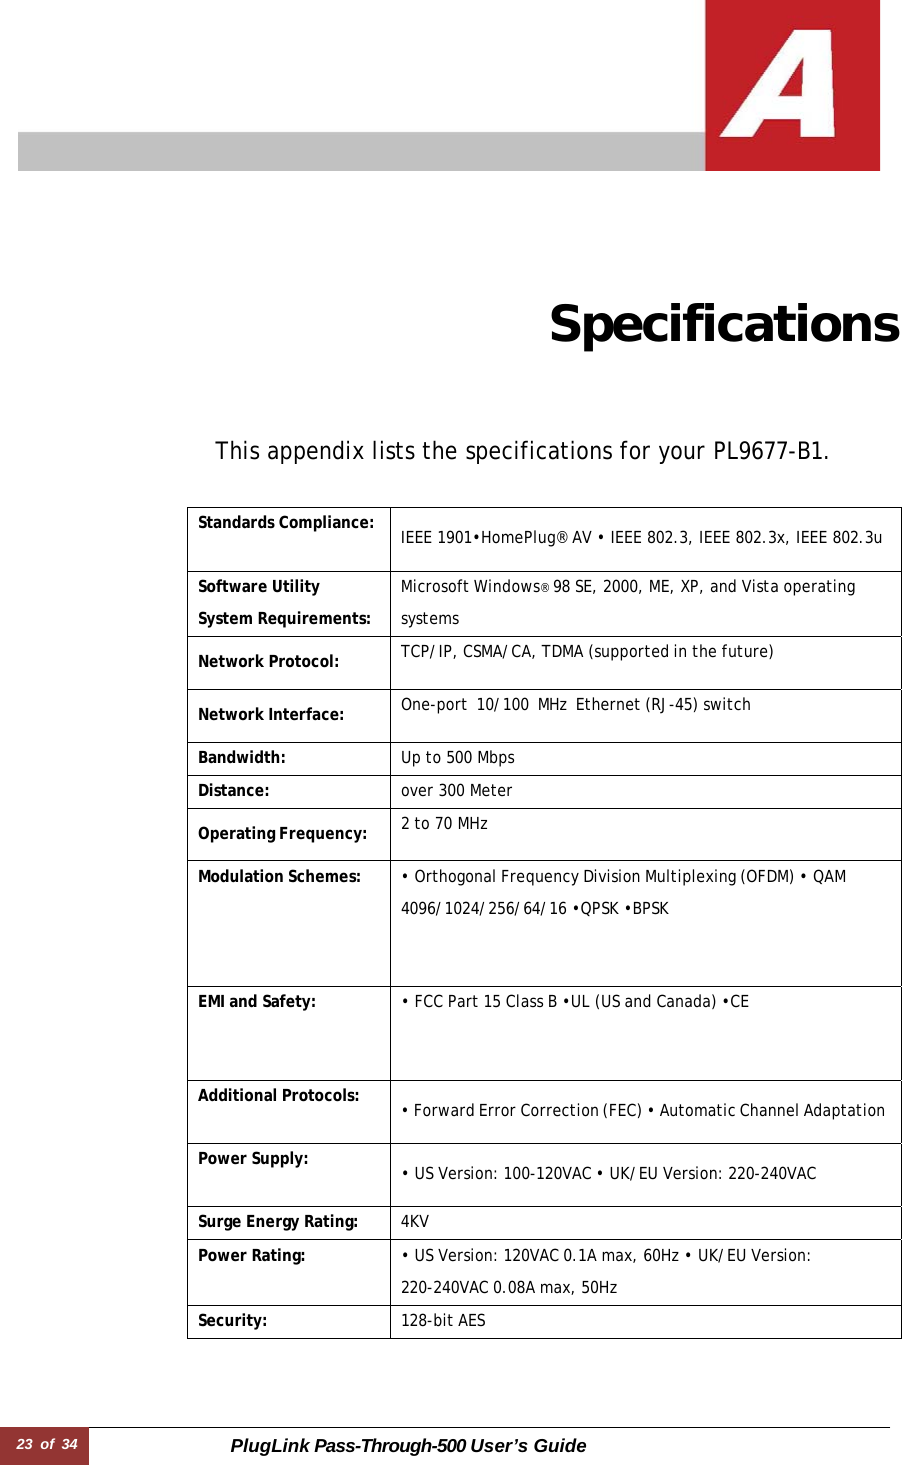 23 of 34 PlugLink Pass-Through-500 User’s Guide                Specifications     This appendix lists the specifications for your PL9677-B1.   Standards Compliance: IEEE 1901•HomePlug® AV • IEEE 802.3, IEEE 802.3x, IEEE 802.3uSoftware Utility  System Requirements:Microsoft Windows® 98 SE, 2000, ME, XP, and Vista operating  systems  Network Protocol: TCP/IP, CSMA/CA, TDMA (supported in the future)  Network Interface: One-port  10/100  MHz  Ethernet (RJ-45) switch Bandwidth: Up to 500 MbpsDistance: over 300 Meter Operating Frequency: 2 to 70 MHzModulation Schemes: • Orthogonal Frequency Division Multiplexing (OFDM) • QAM  4096/1024/256/64/16 •QPSK •BPSK EMI and Safety: • FCC Part 15 Class B •UL (US and Canada) •CE Additional Protocols: • Forward Error Correction (FEC) • Automatic Channel AdaptationPower Supply: • US Version: 100-120VAC • UK/EU Version: 220-240VAC Surge Energy Rating: 4KVPower Rating: • US Version: 120VAC 0.1A max, 60Hz • UK/EU Version:  220-240VAC 0.08A max, 50Hz Security: 128-bit AES